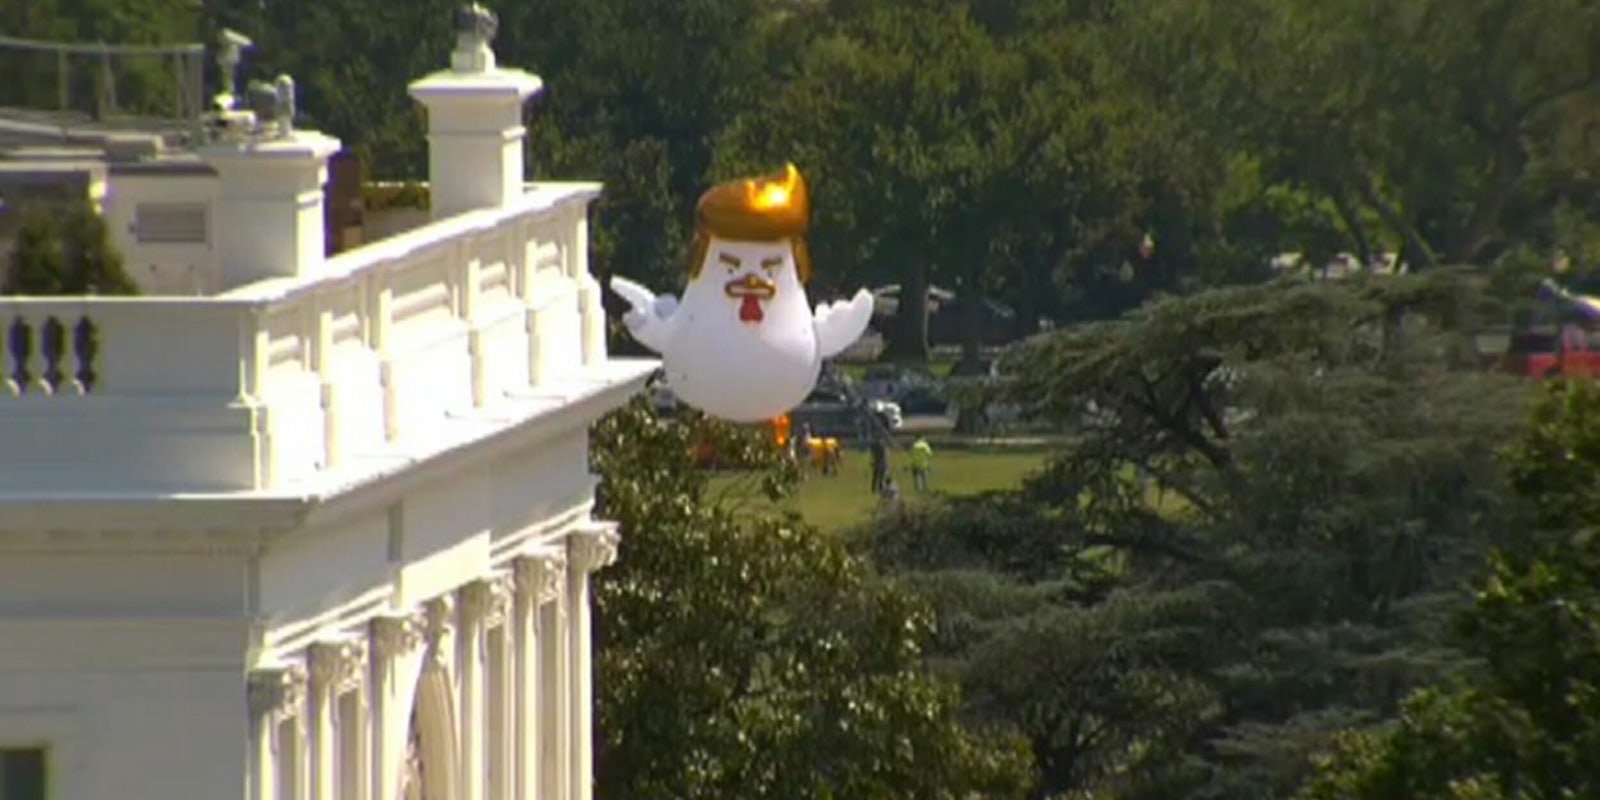 An inflatable chicken that looks like Donald Trump appeared near the White House on Wednesday.